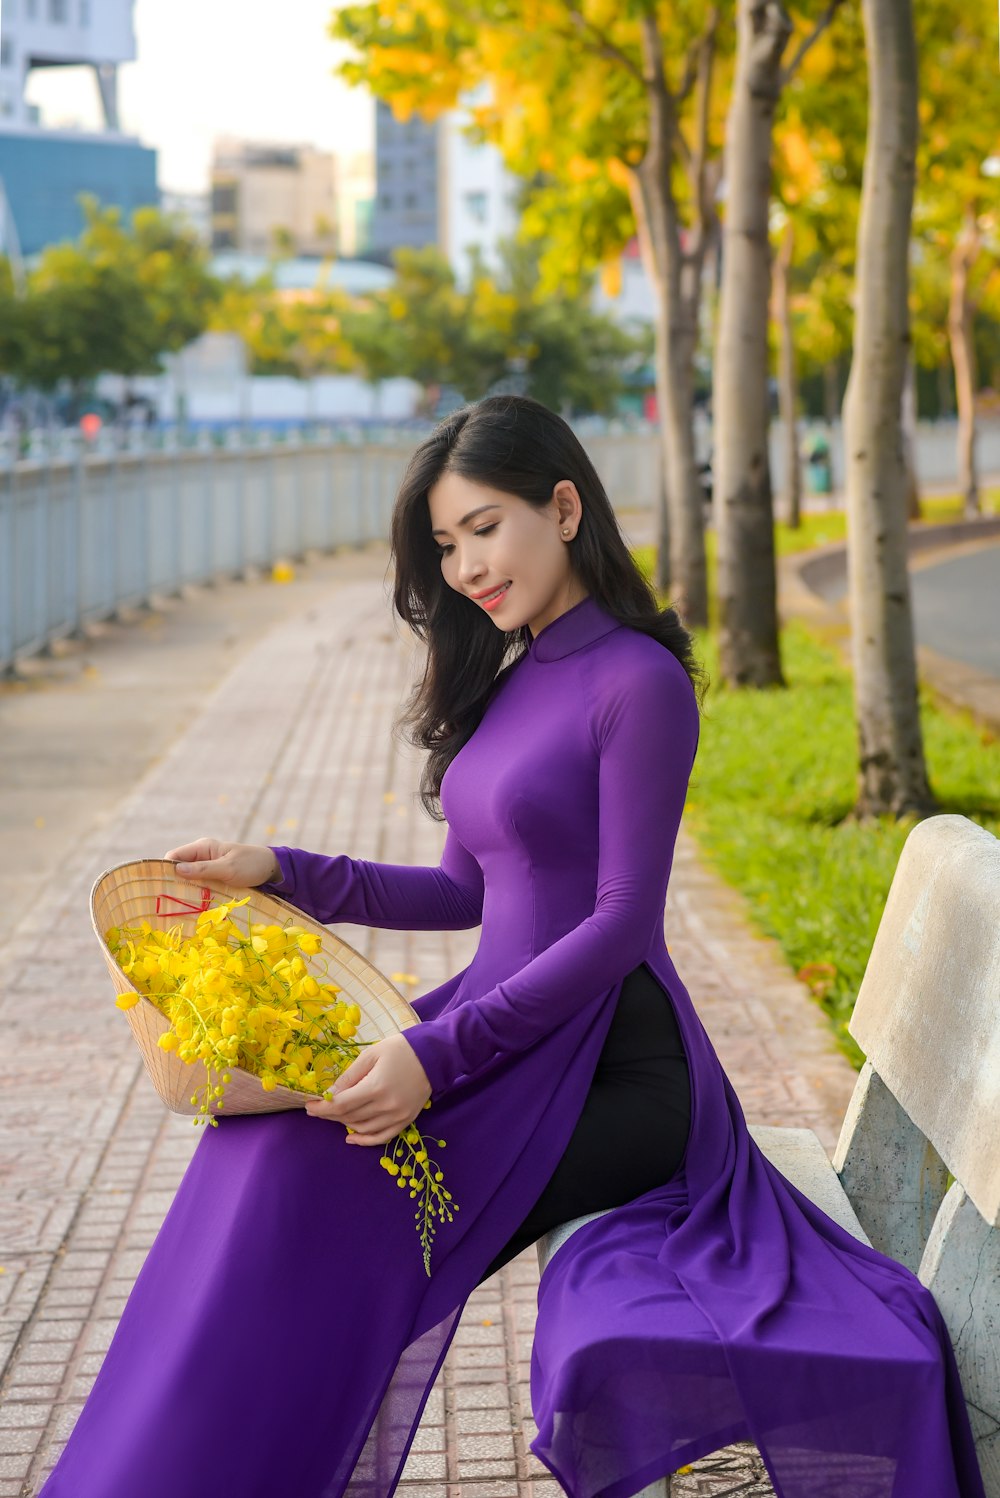 woman in purple long sleeve dress sitting on concrete bench during daytime